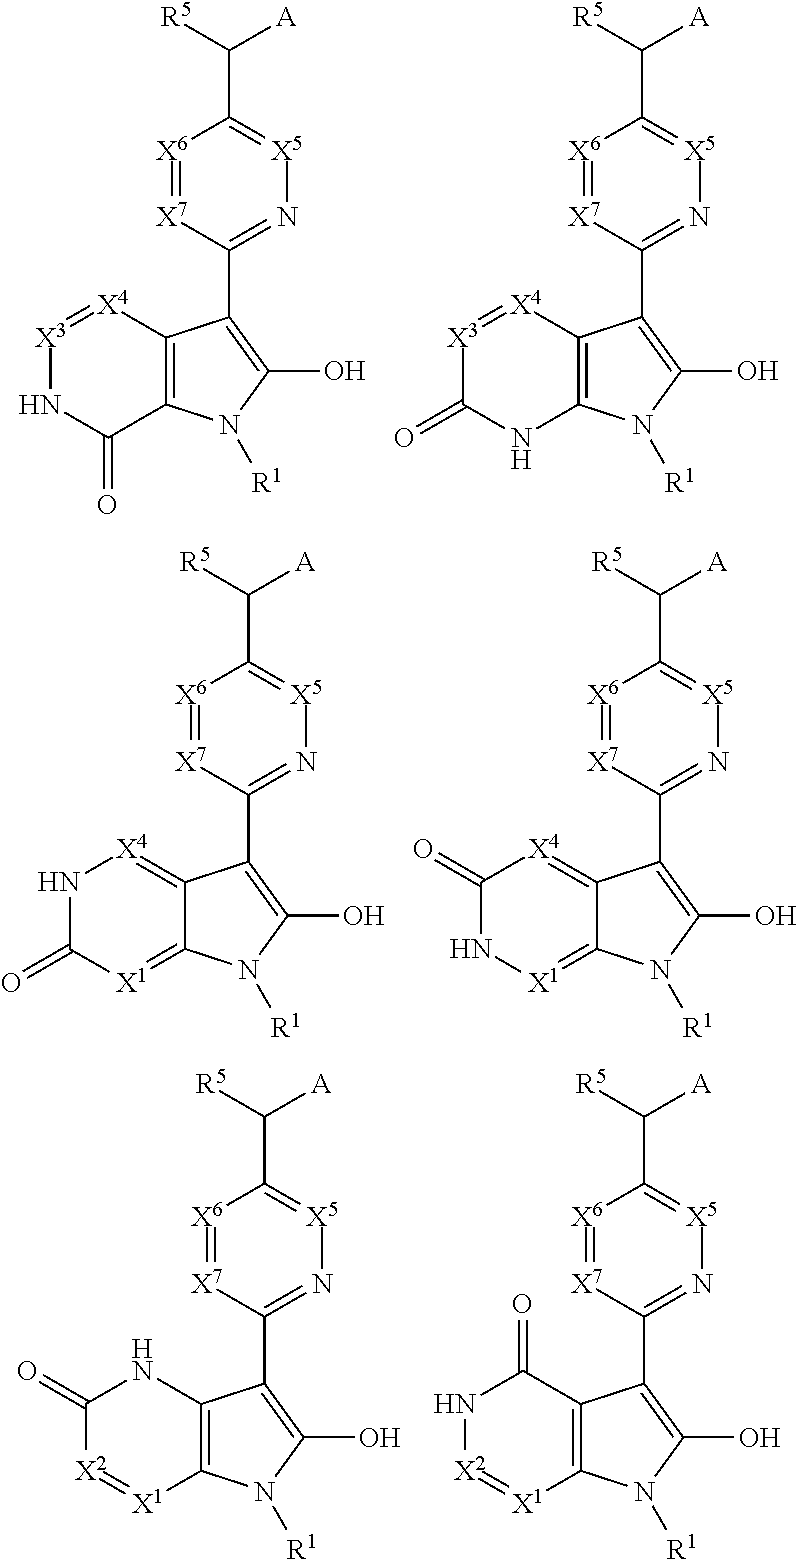 Heterocyclic compounds and their use as glycogen synthase kinase-3 inhibitors